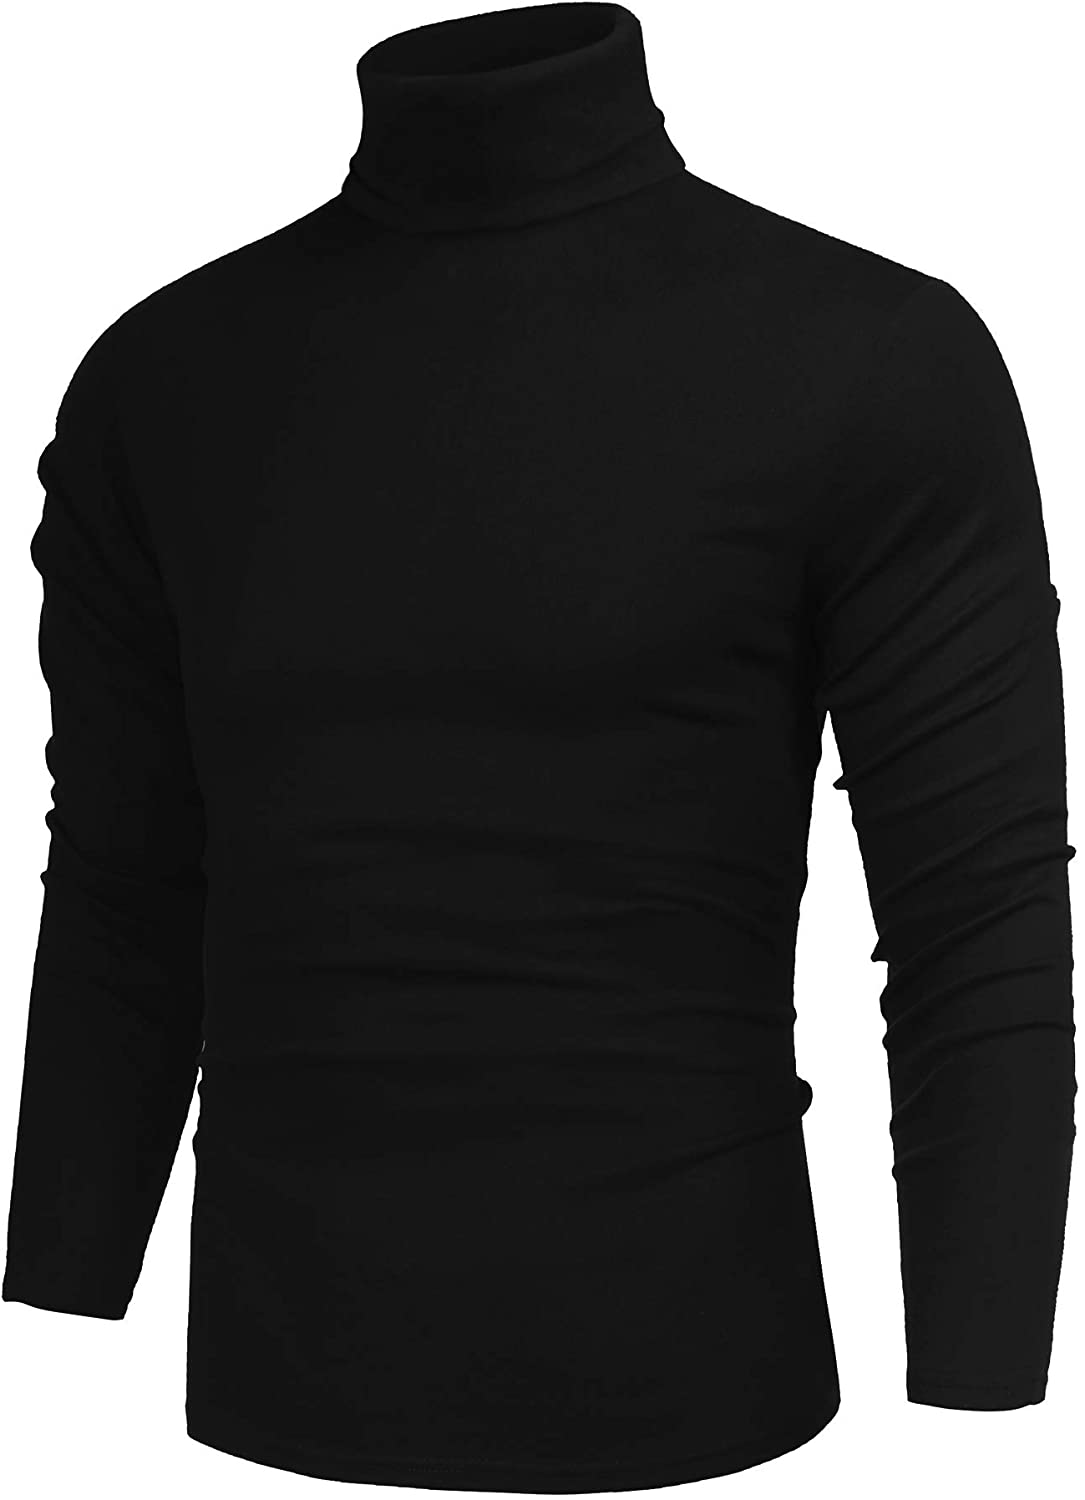 Poriff Men's Casual Slim Fit Basic Tops Knitted Thermal Turtleneck Pullover Sweater 